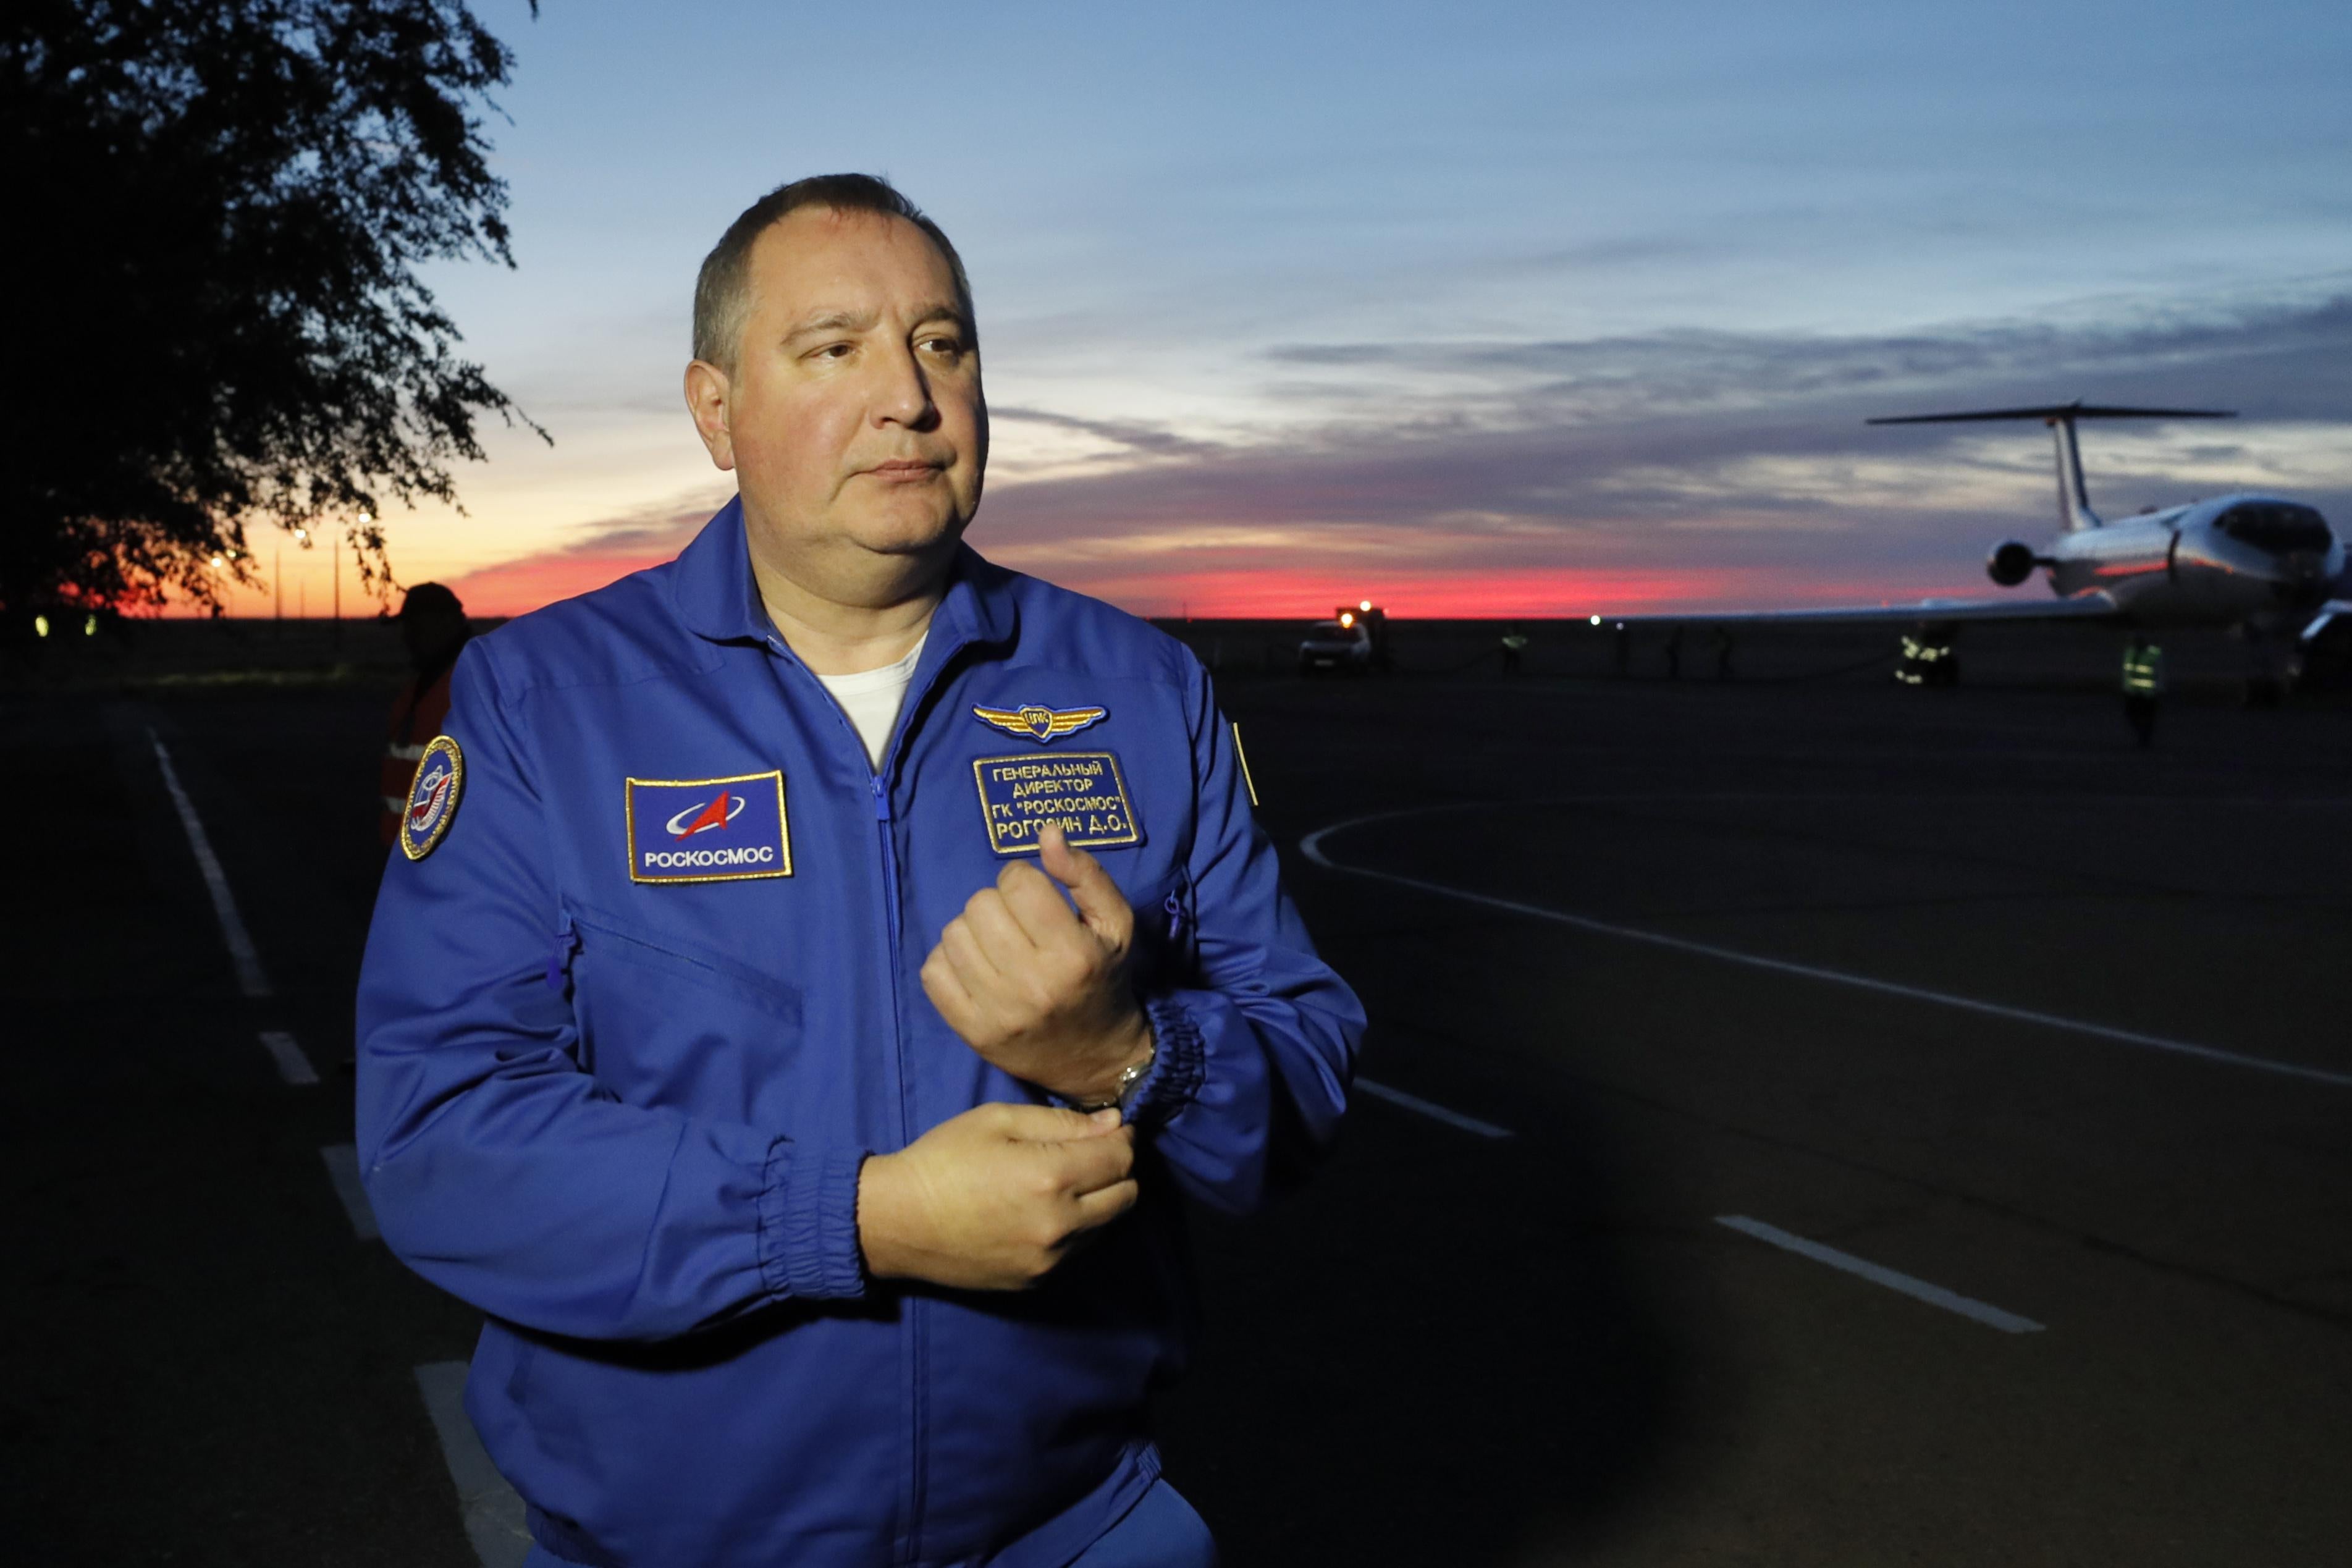 Dmitry Rogozin, the head of the Russian space agency Roscosmos, stands in front of a small jet plane while the sun sets behind him.